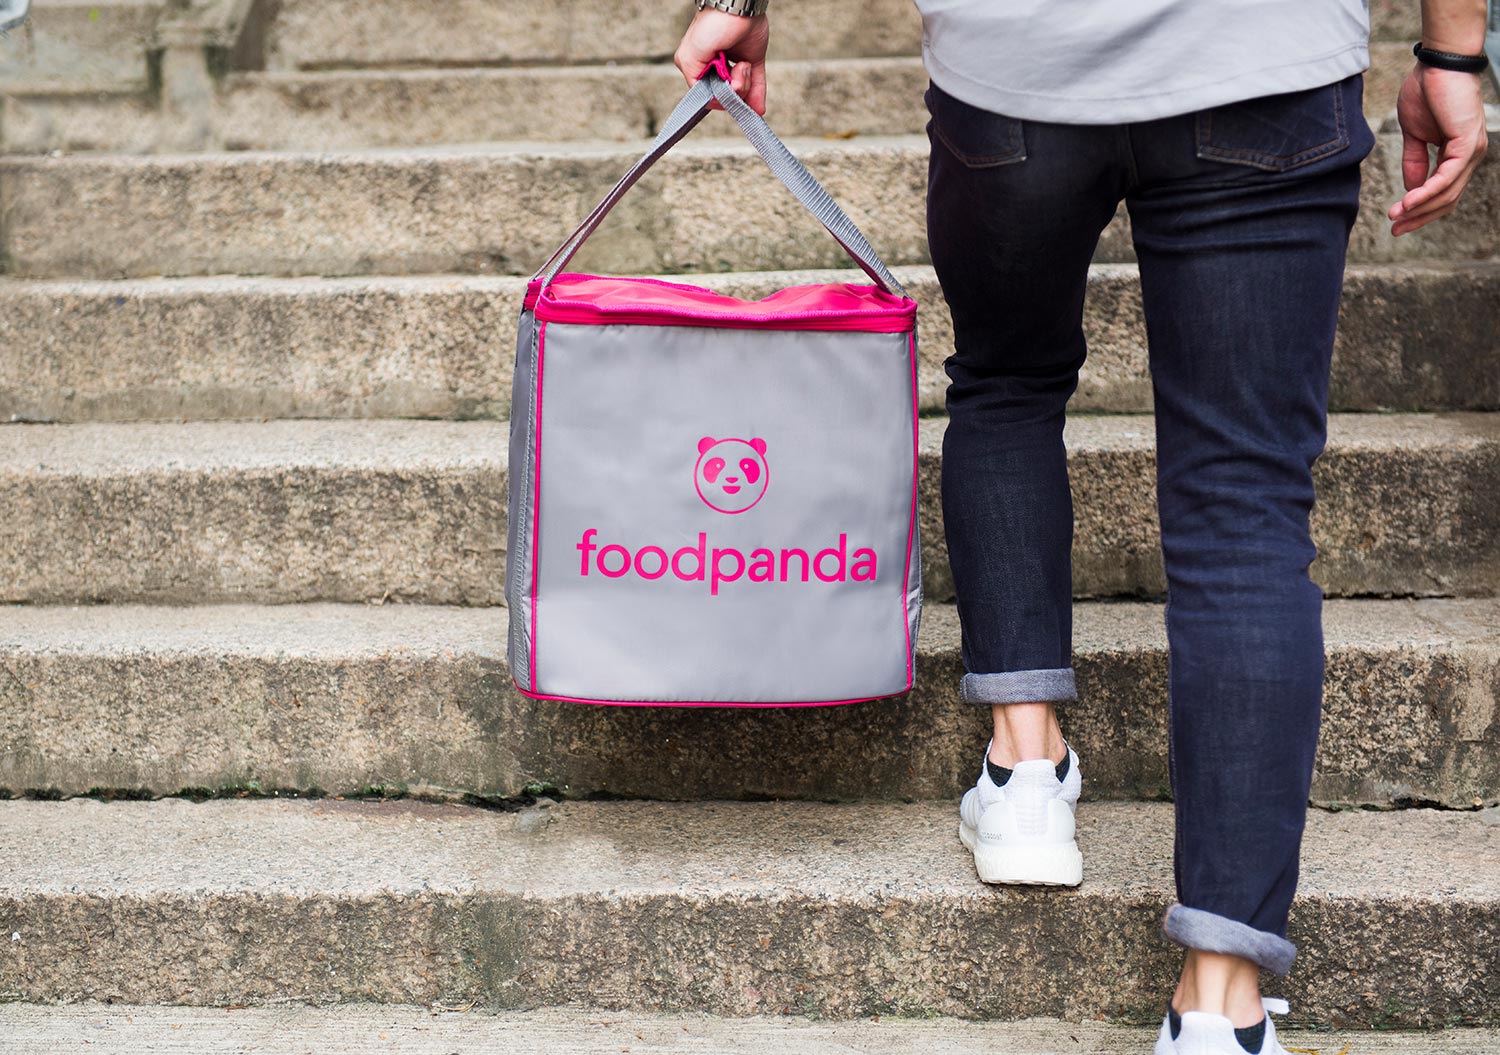 foodpanda Cuts the Queue with First-of-its-kind Service ...